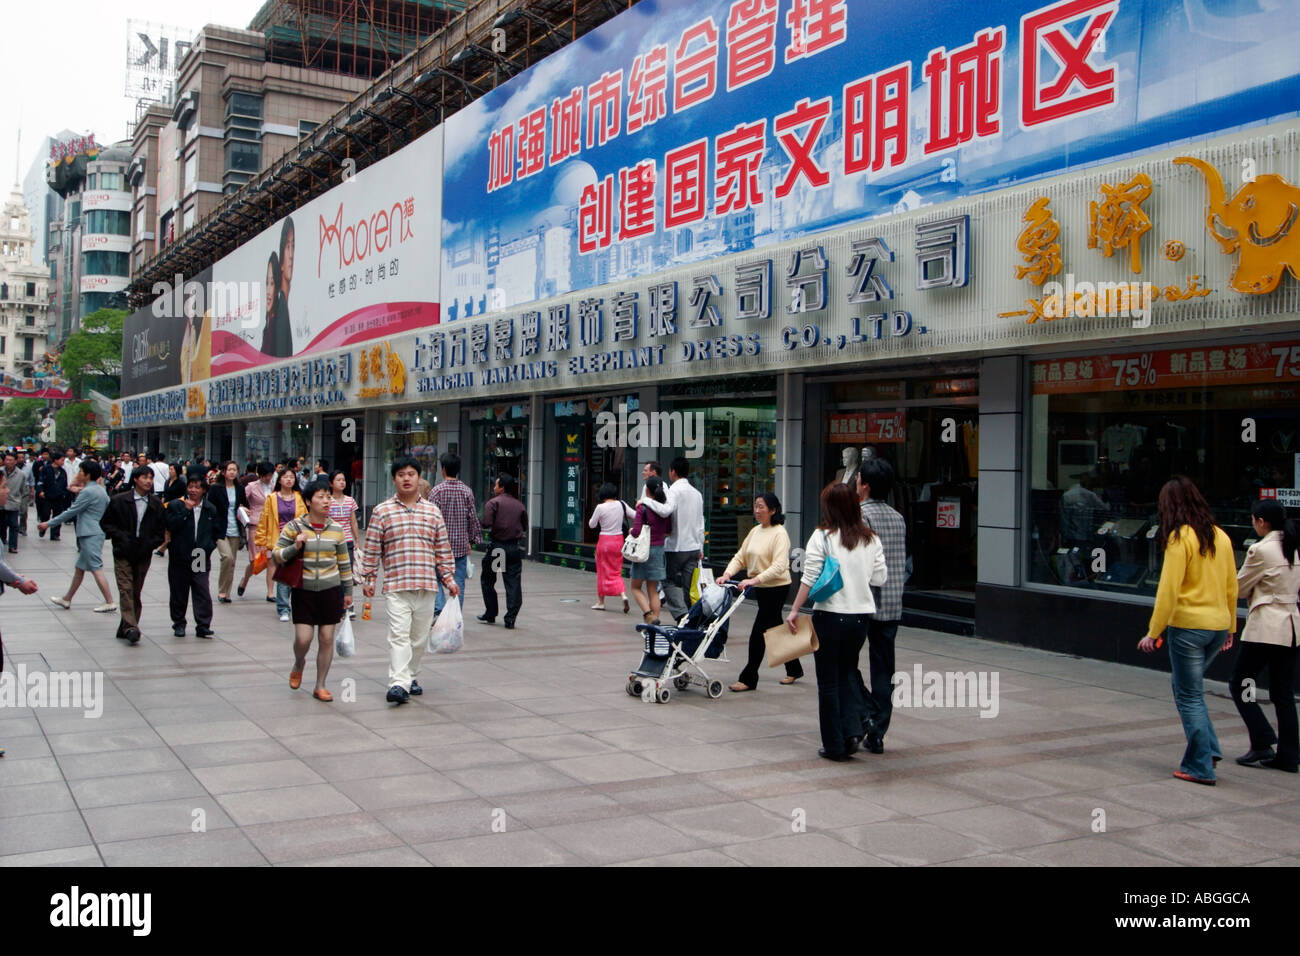 Shoppers pass by the Elephant Dress Store on Shopping Street in Shanghai China Stock Photo